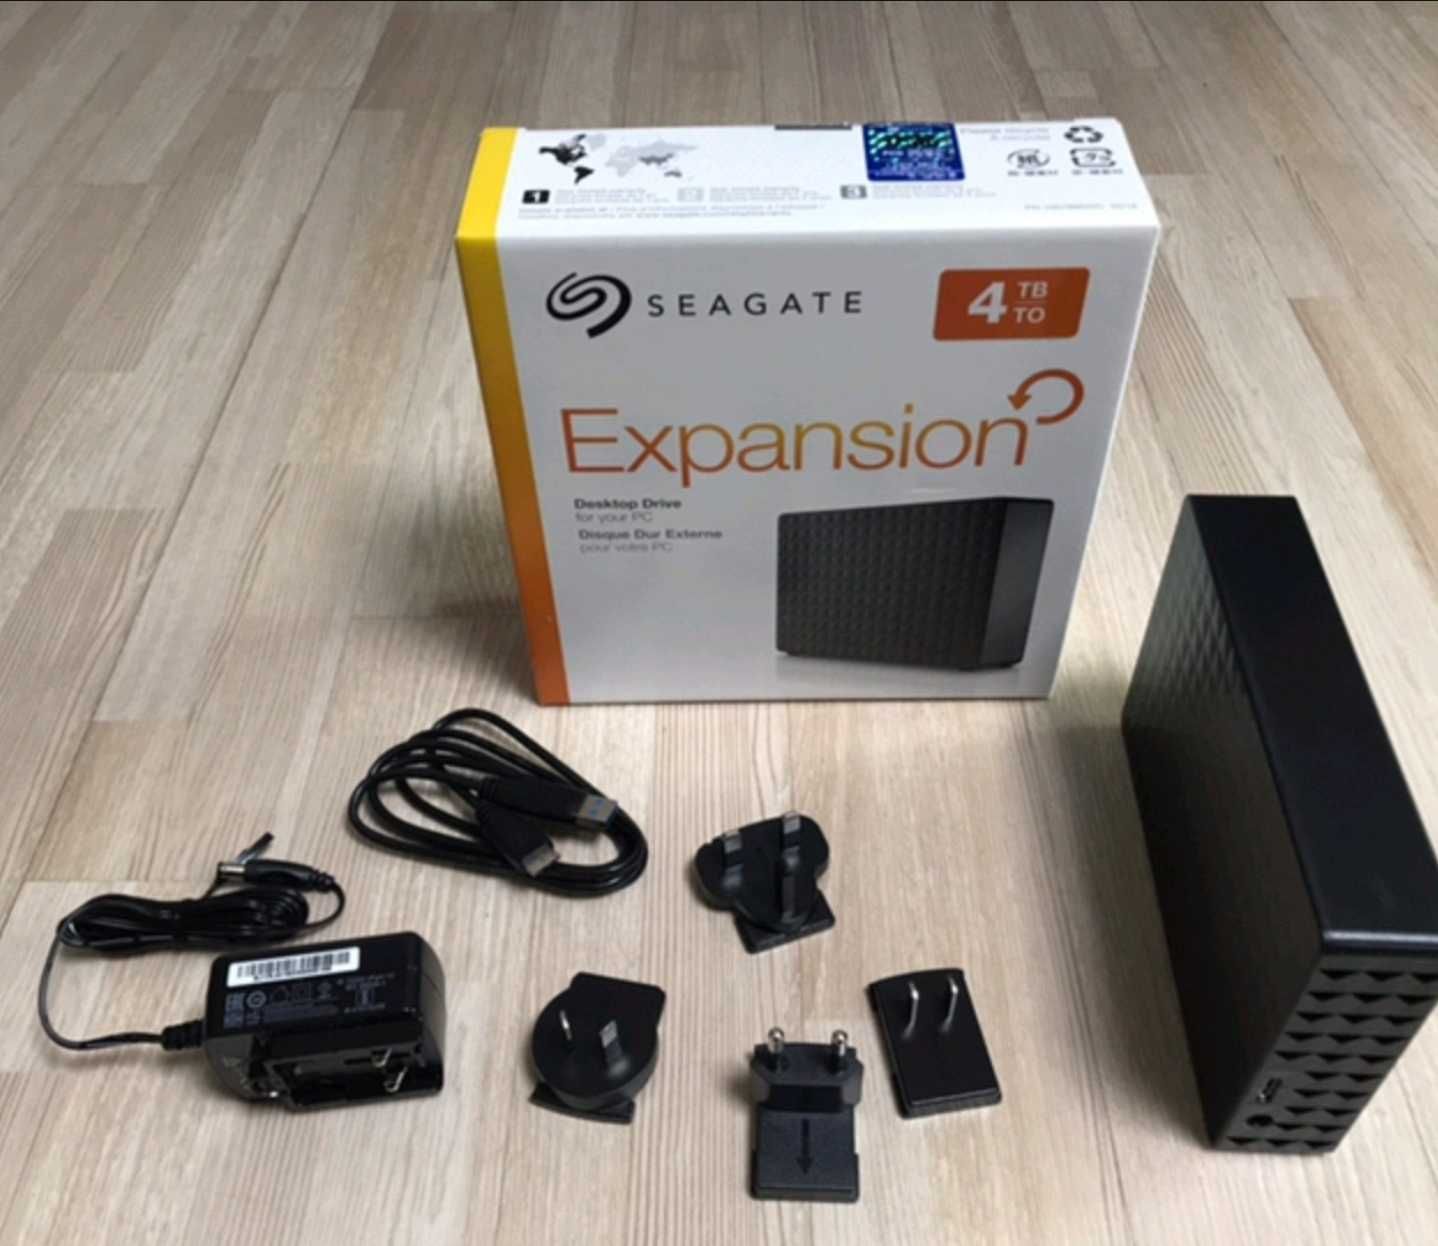 Expansion SEAGATE 4TB